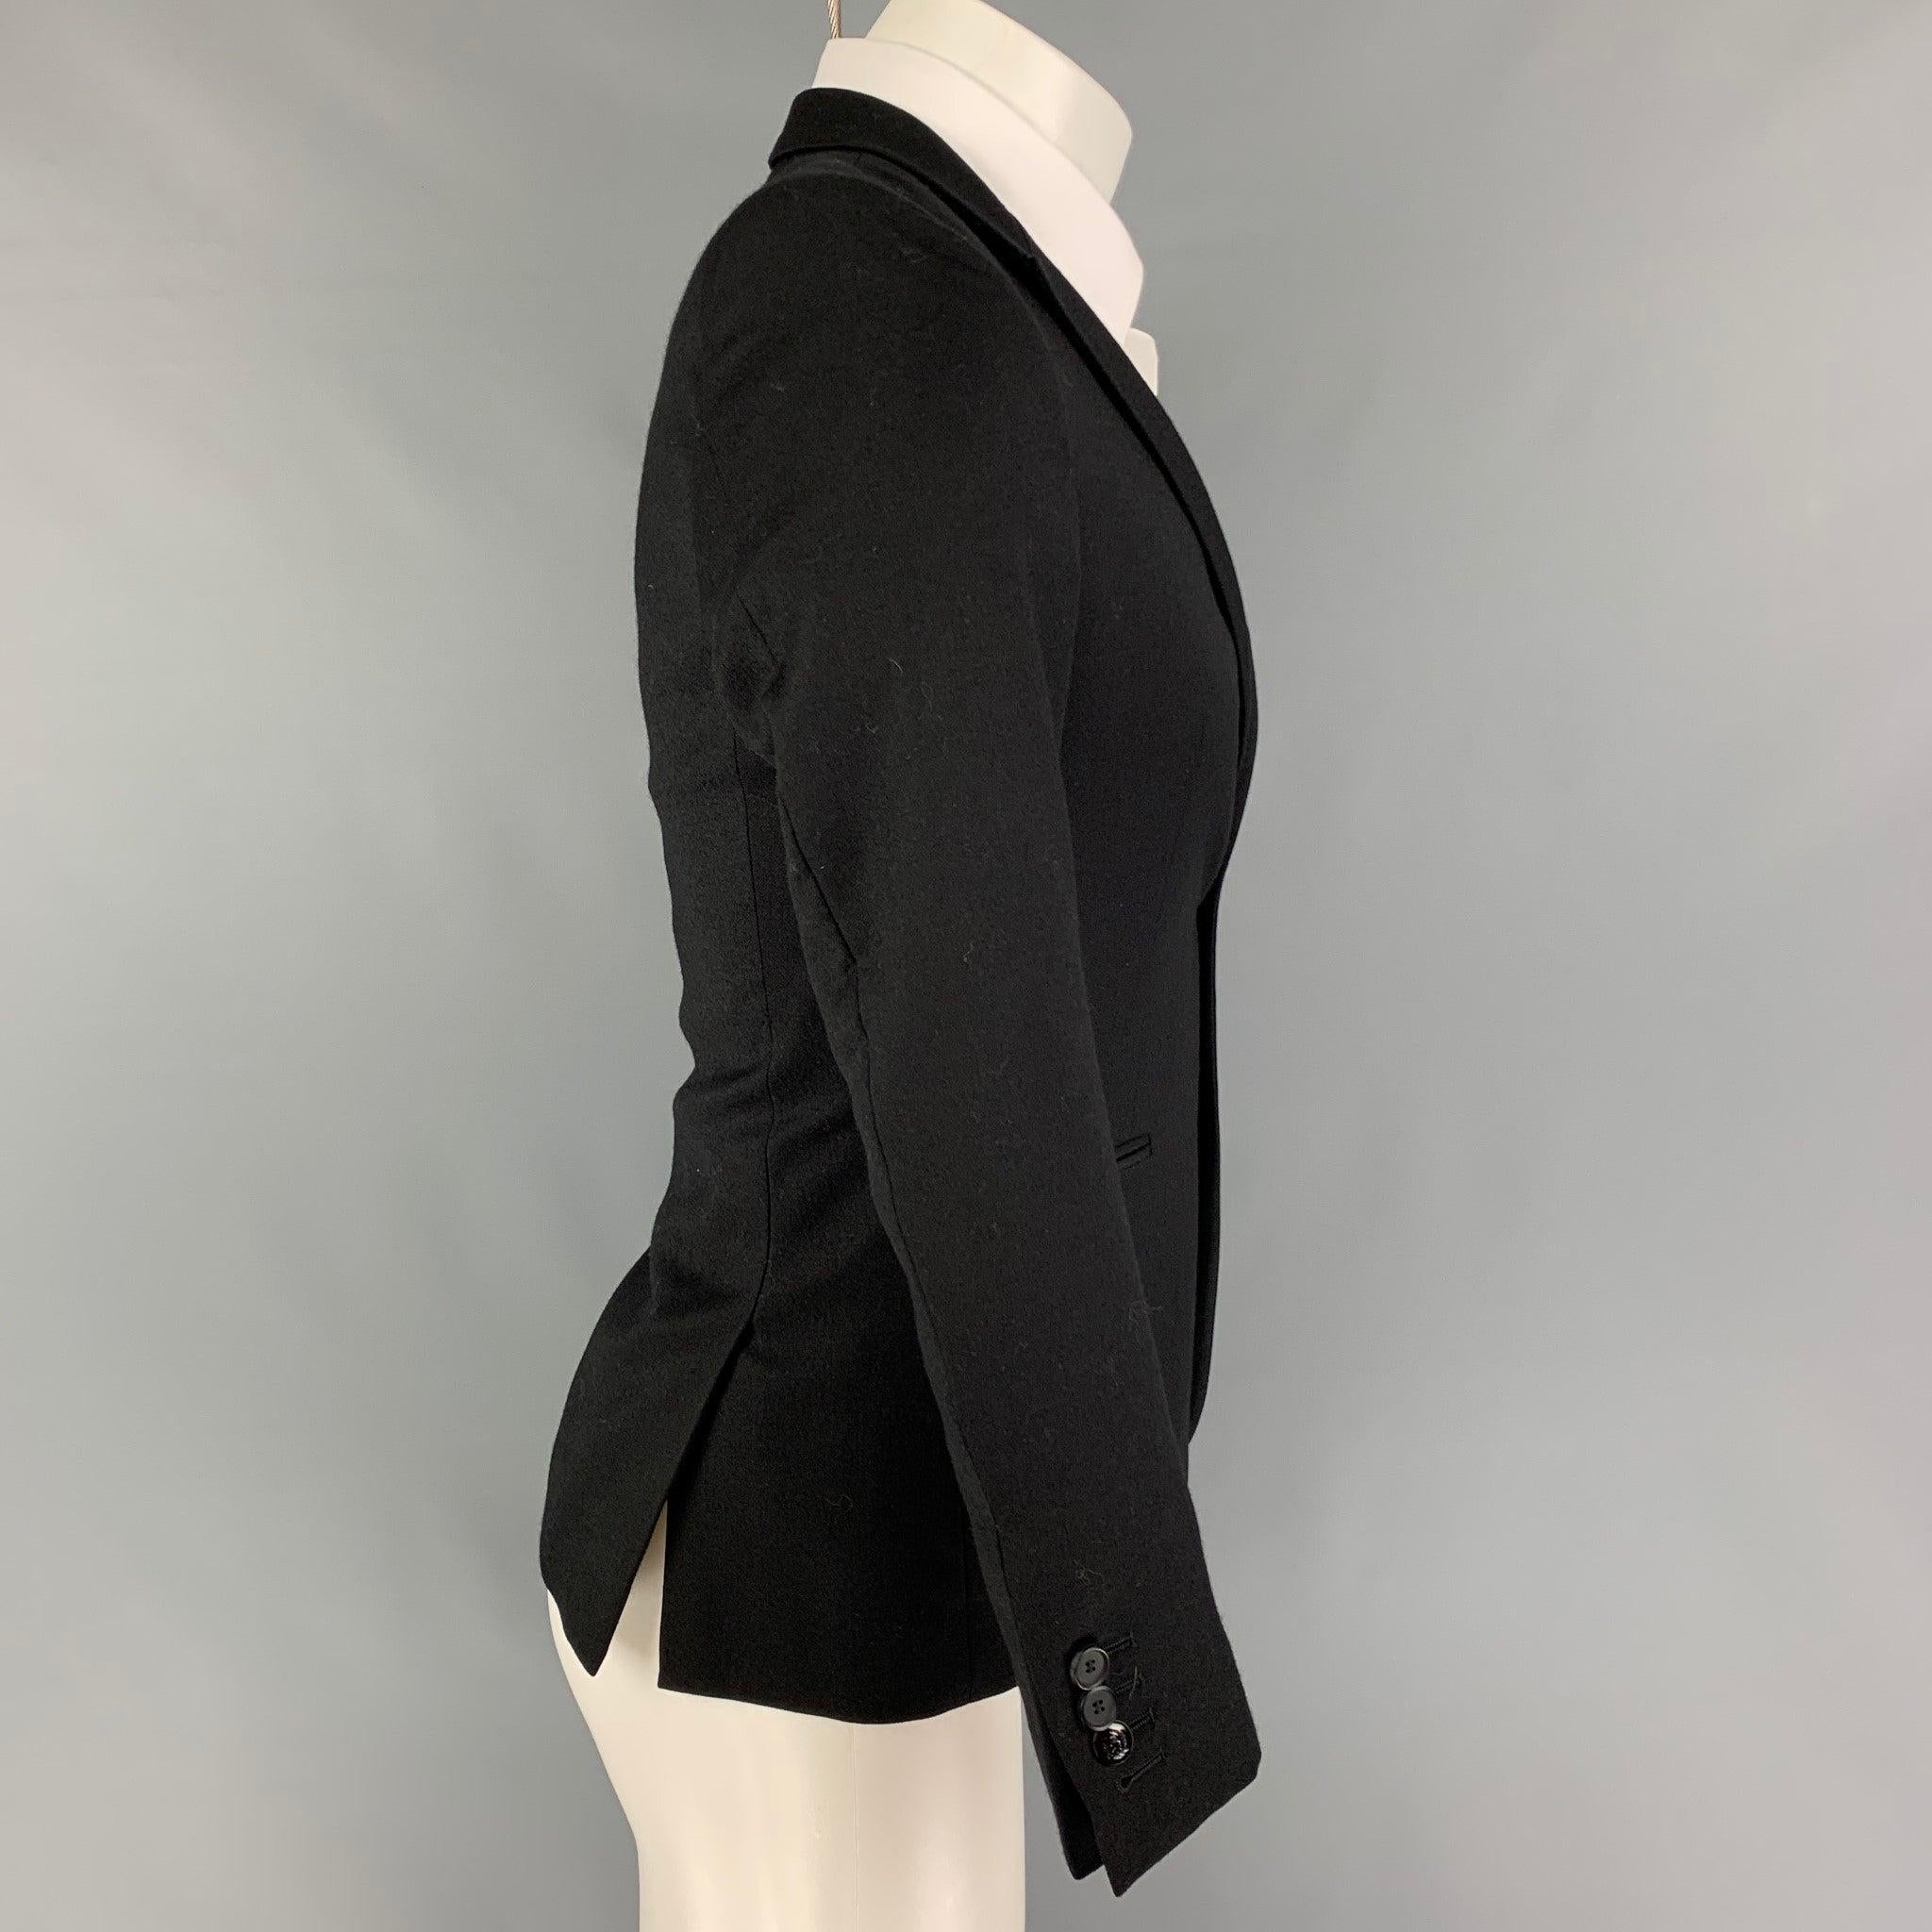 THE KOOPLES sport coat comes in a black wool featuring a peak lapel, slit pockets, double back vent, and double button closure.
Very Good
Pre-Owned Condition. 

Marked:   44 

Measurements: 
 
Shoulder: 15.5 inches  Chest: 36 inches  Sleeve: 24.5